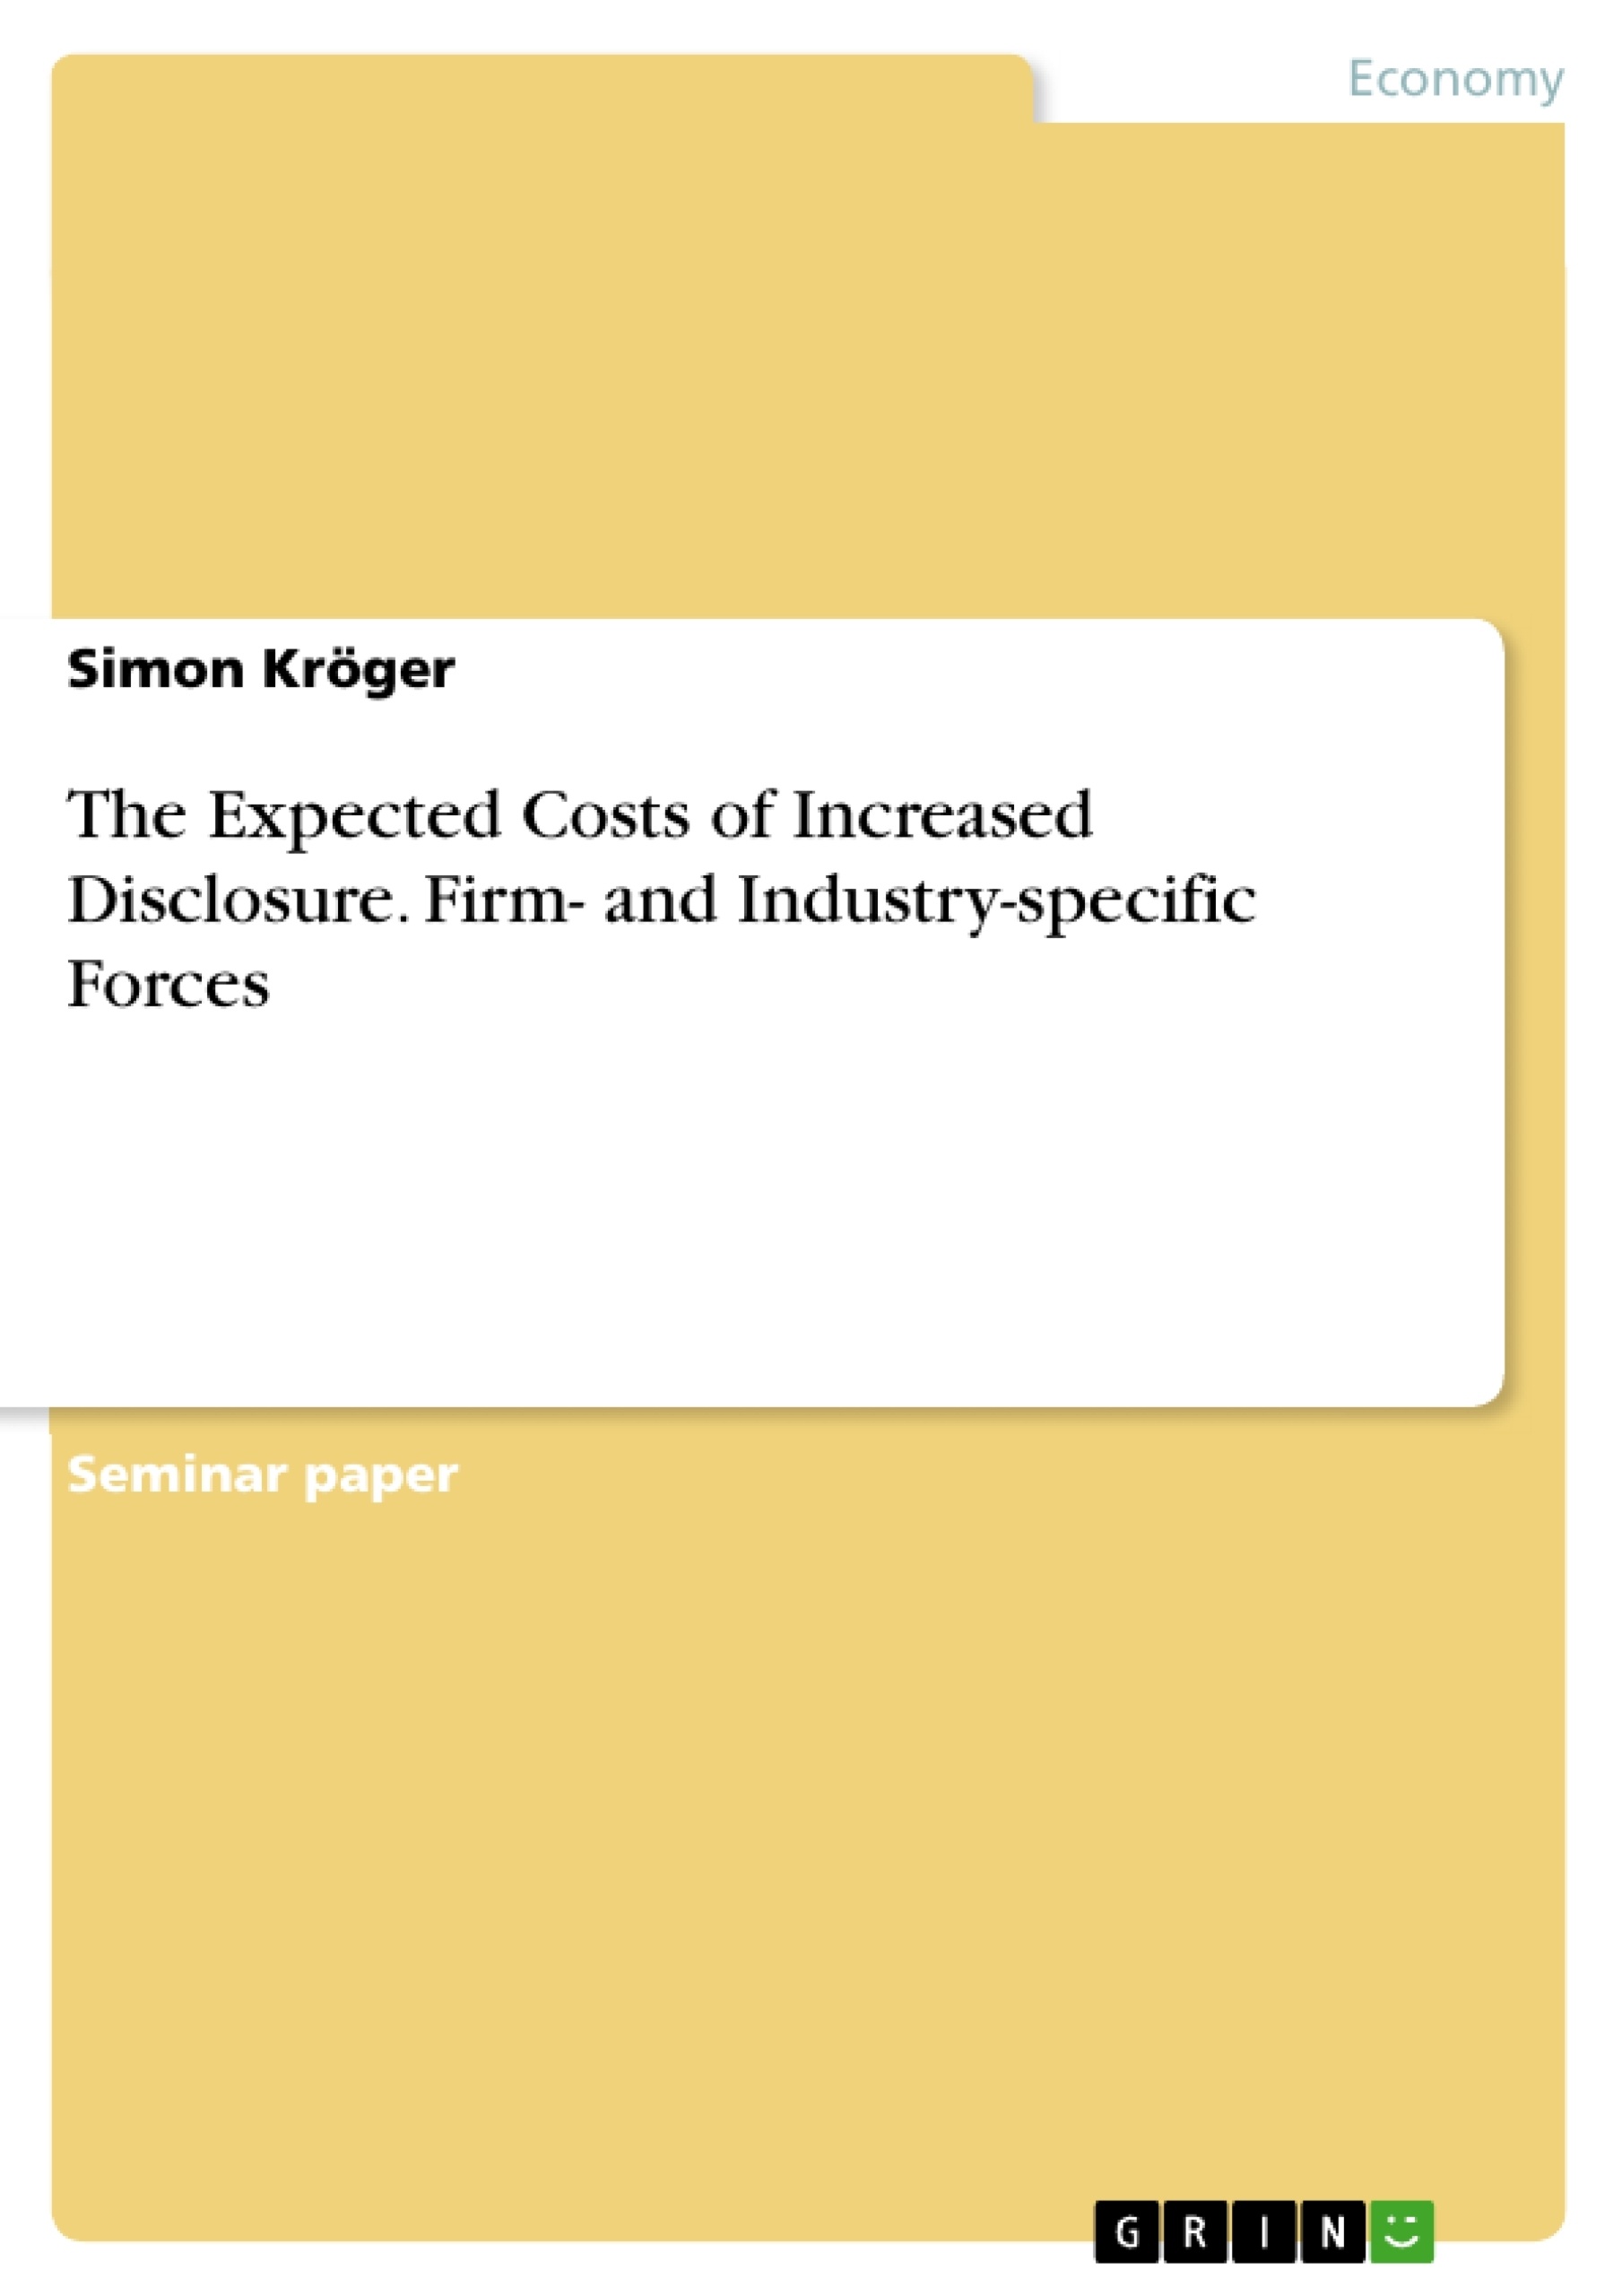 Title: The Expected Costs of Increased Disclosure. Firm- and Industry-specific Forces